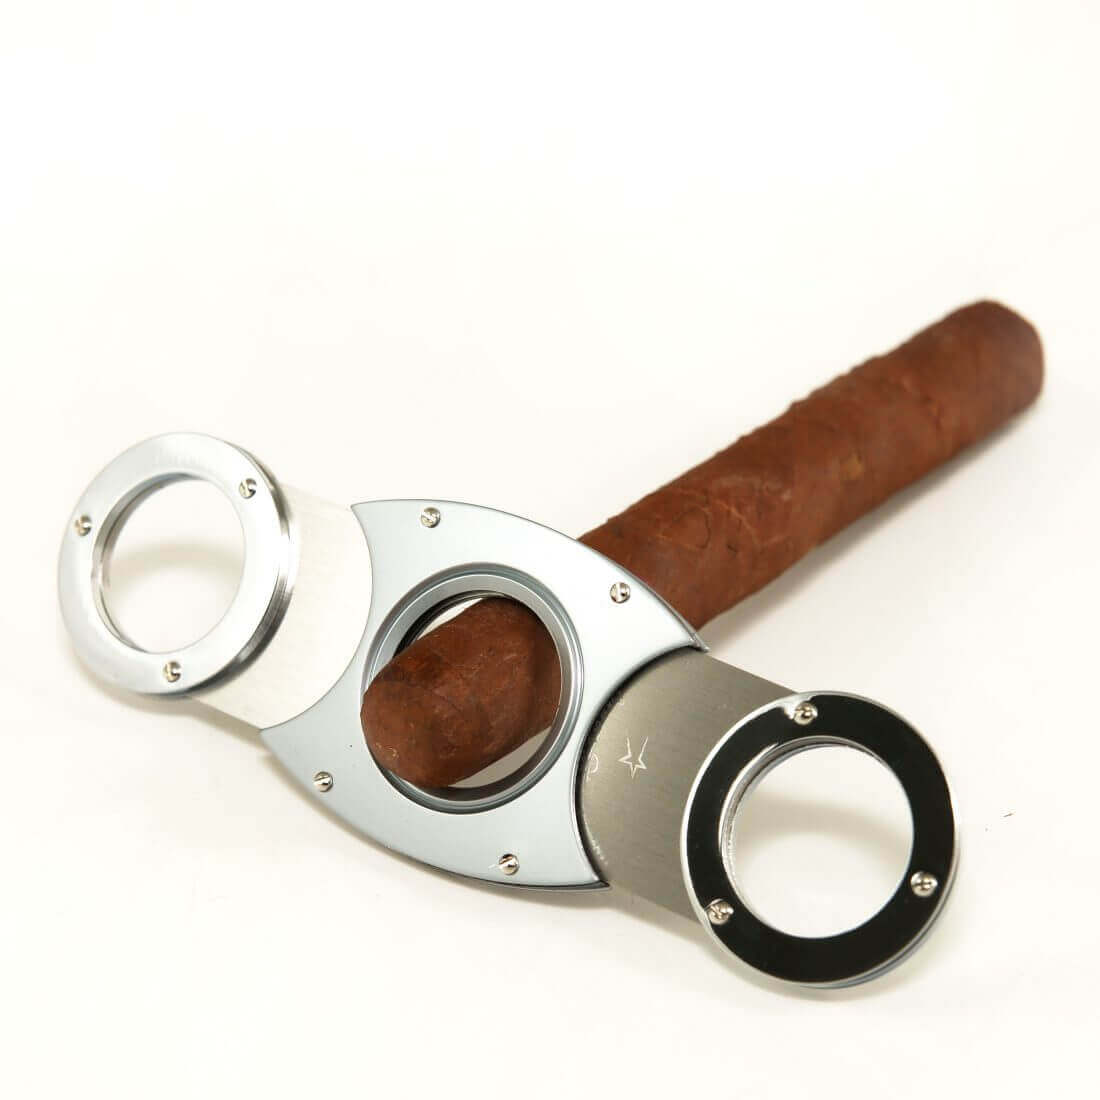 Cigar Cutters | How to choose the right Cigar Cutter for your cigars.